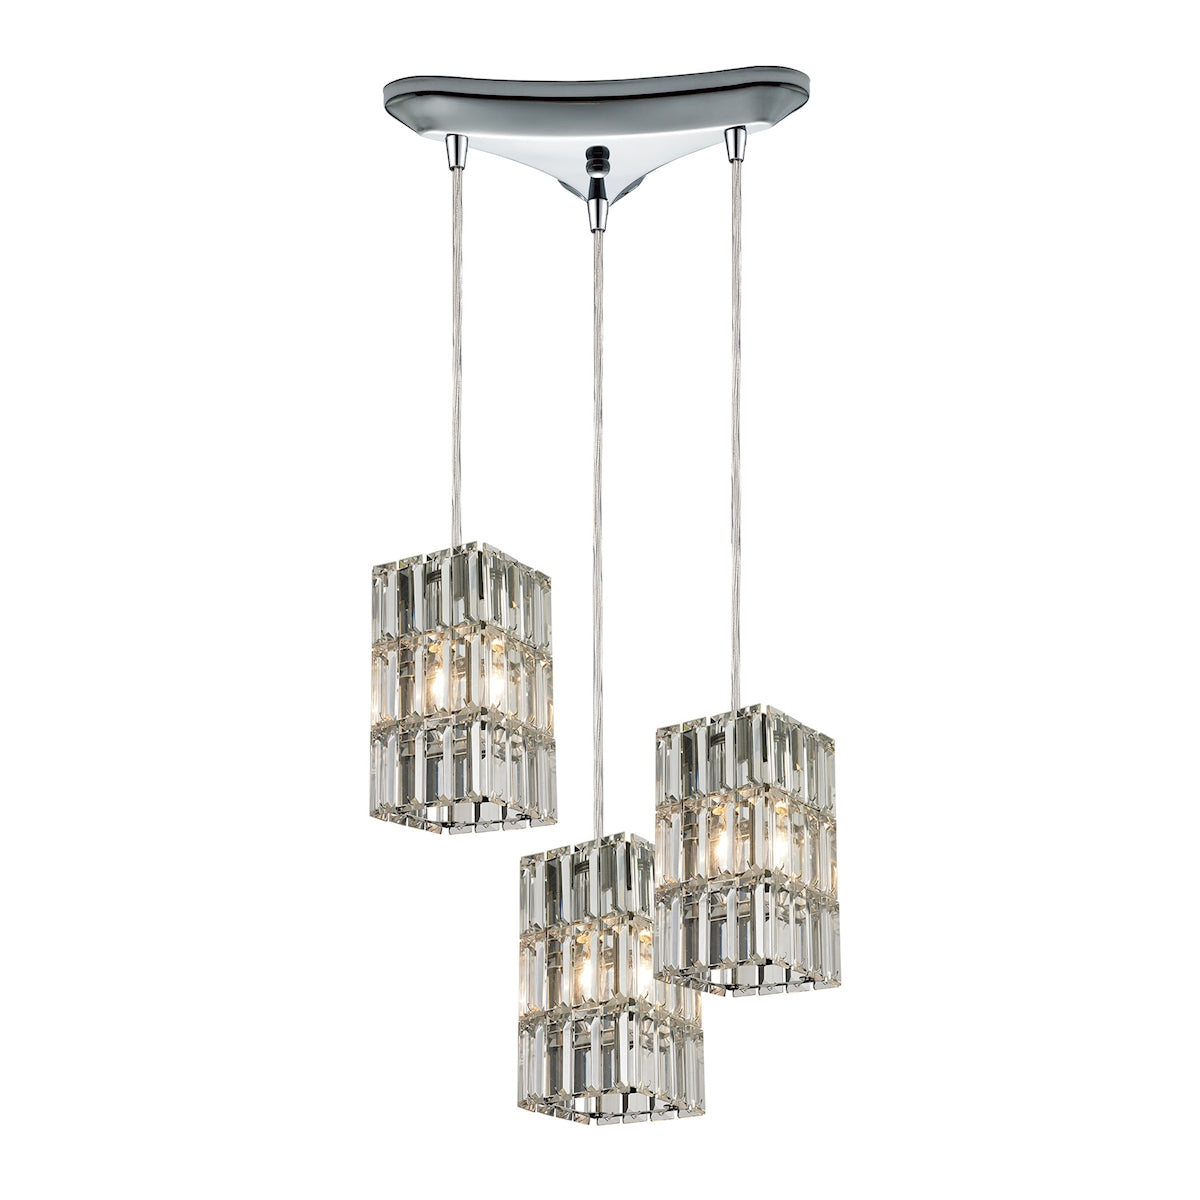 ELK Lighting 31488/3 Cynthia 3-Light Triangular Pendant Fixture in Polished Chrome with Crystal